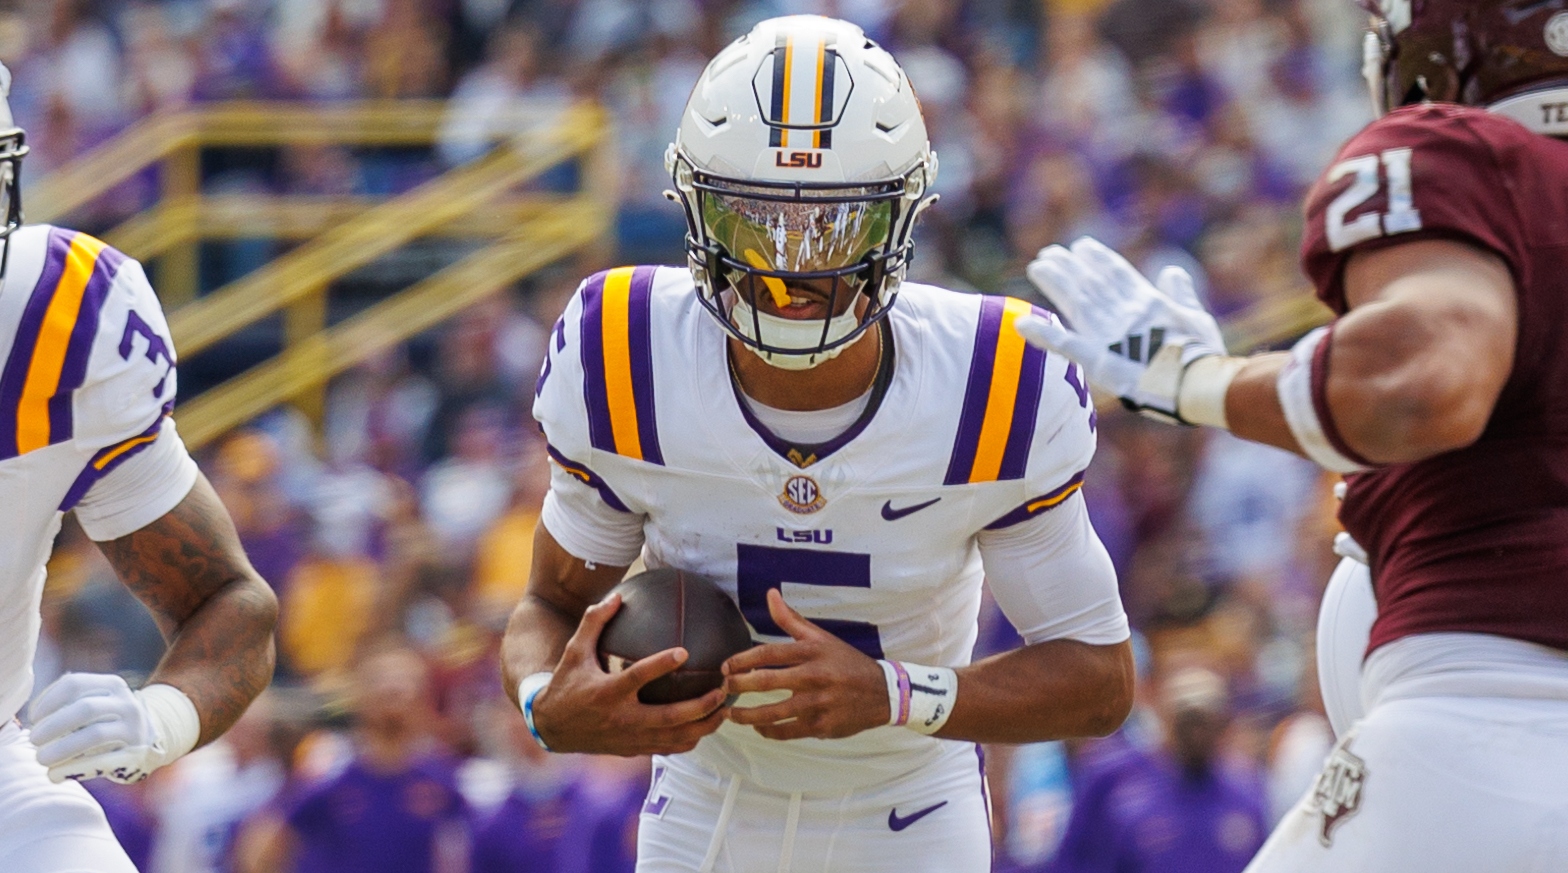 LSU quarterback Jayden Daniels rushes the ball during a game against Texas A&M.